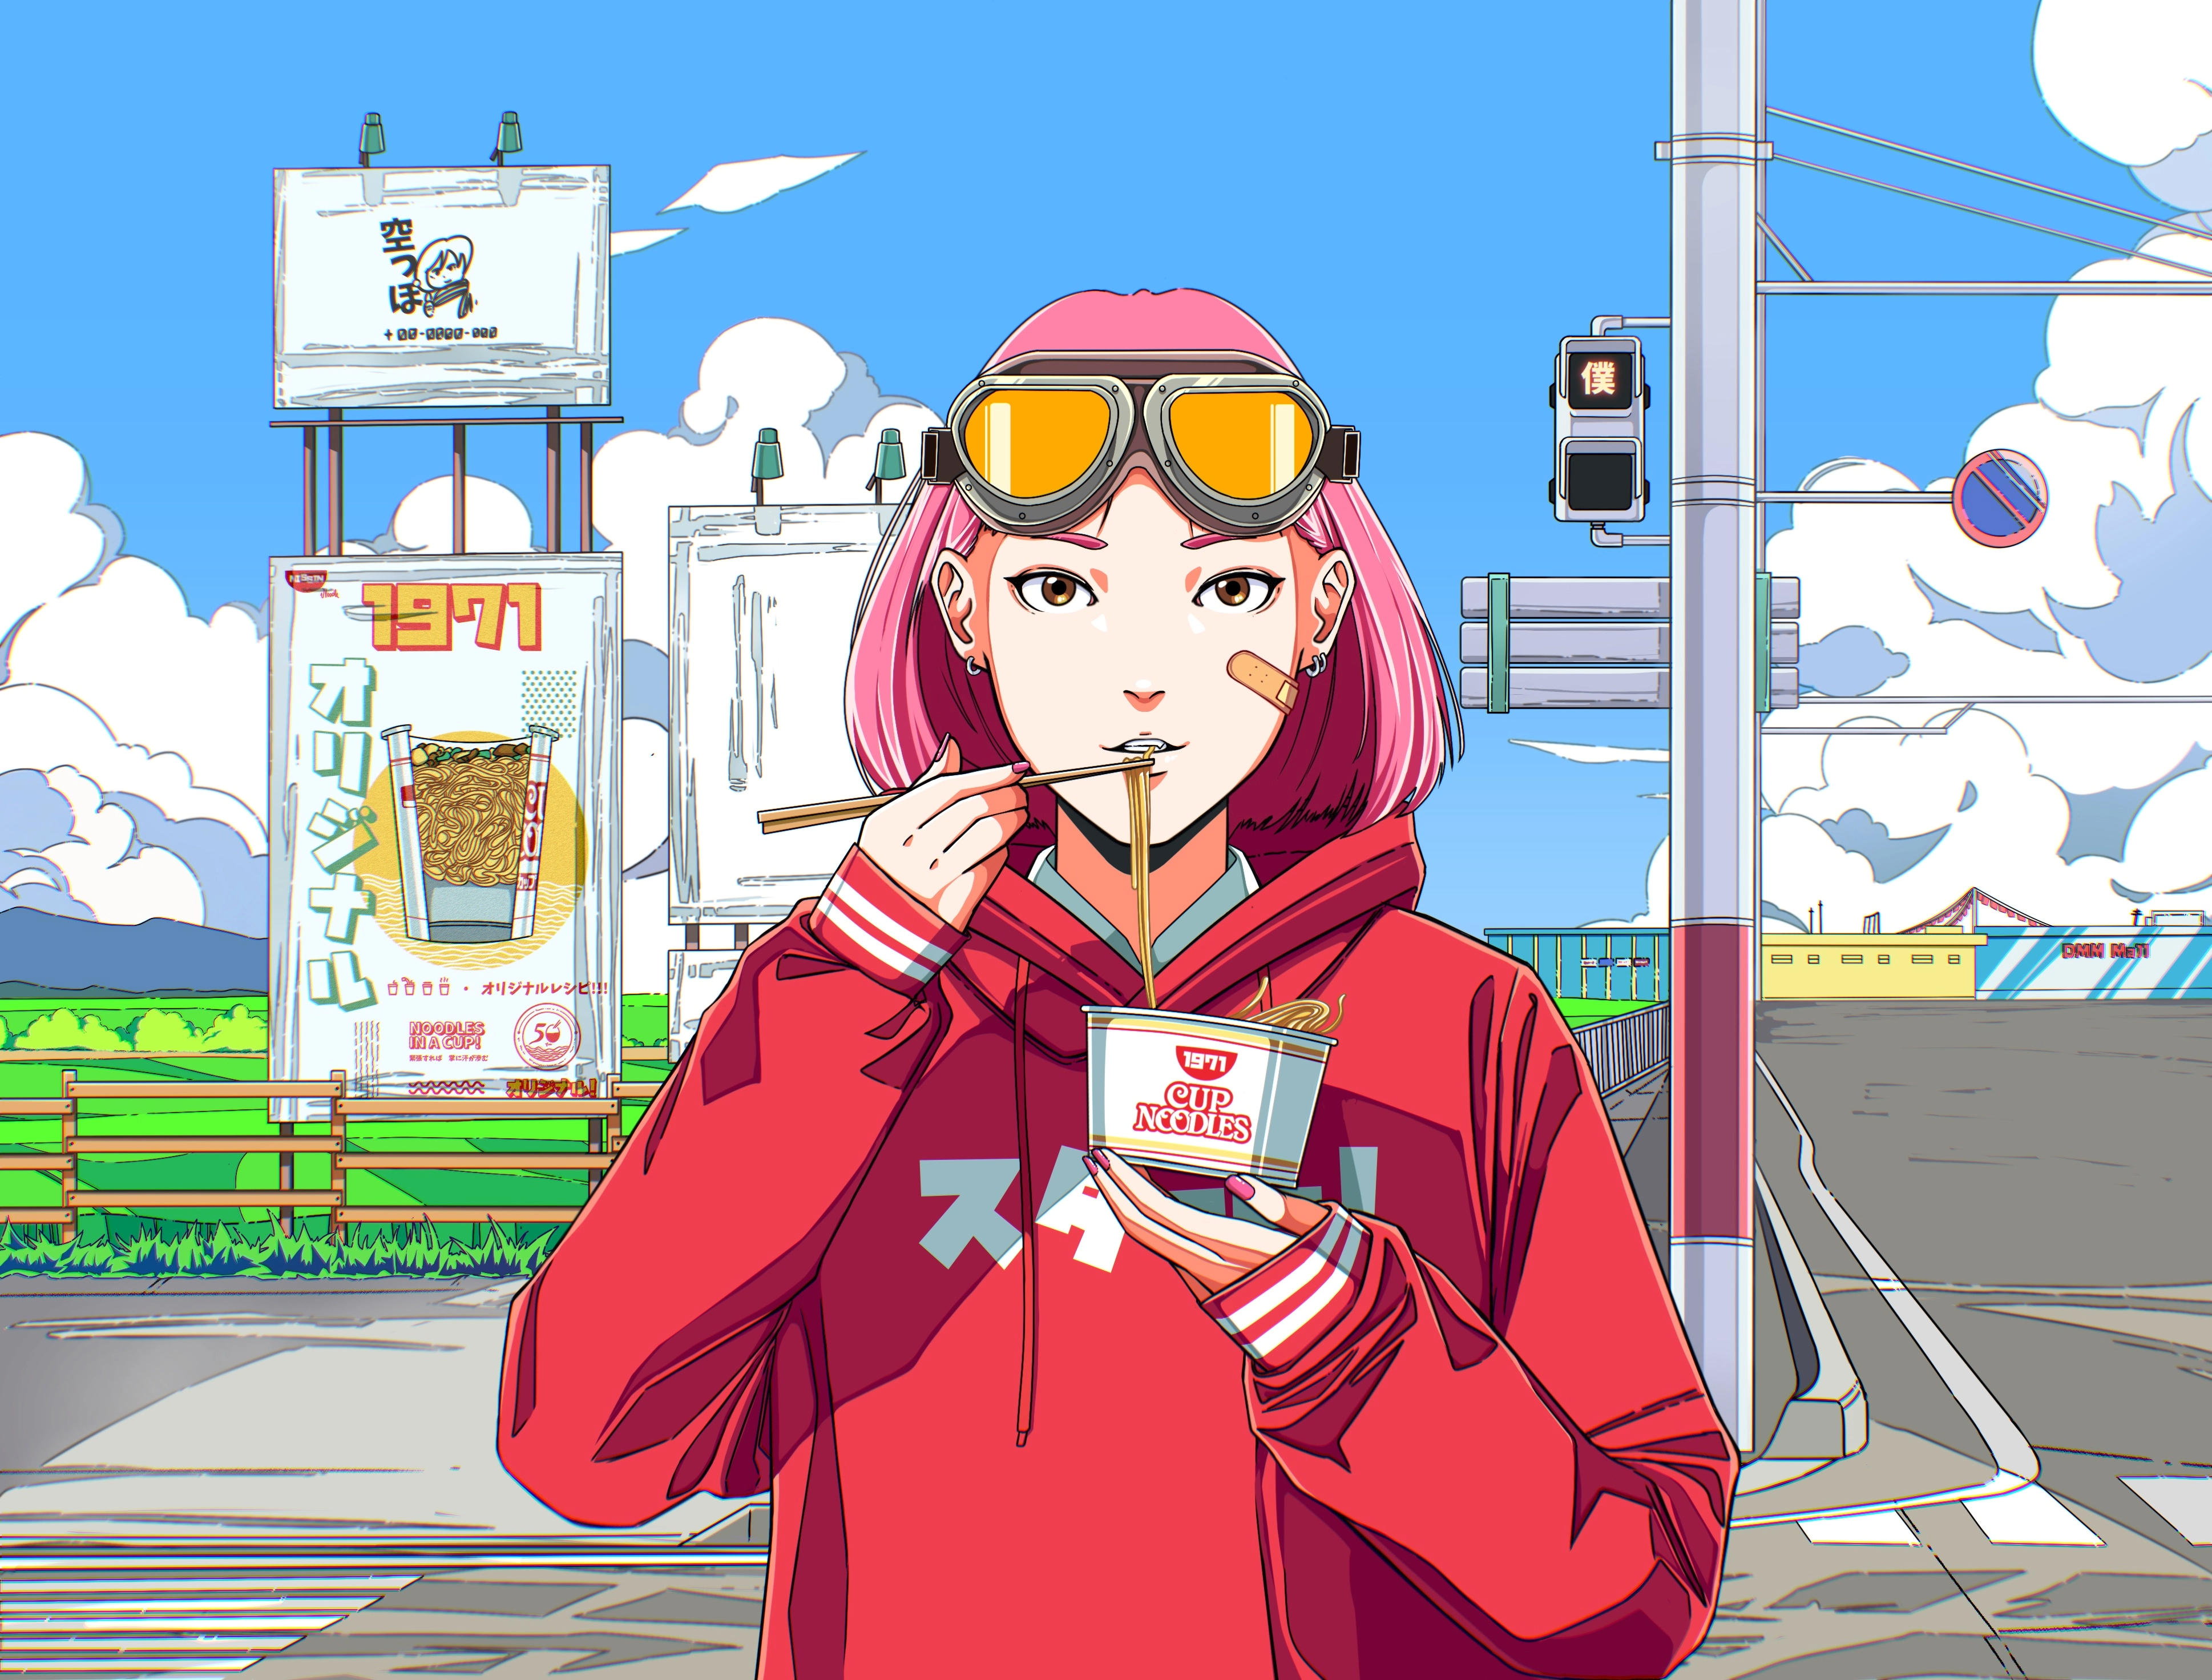 Anime 3876x2943 digital art artwork illustration street clouds women earring pink hair eating looking at viewer traffic lights noodles anime girls sky sign food Band-Aid cup Japanese chopsticks hoods goggles road outdoors women outdoors